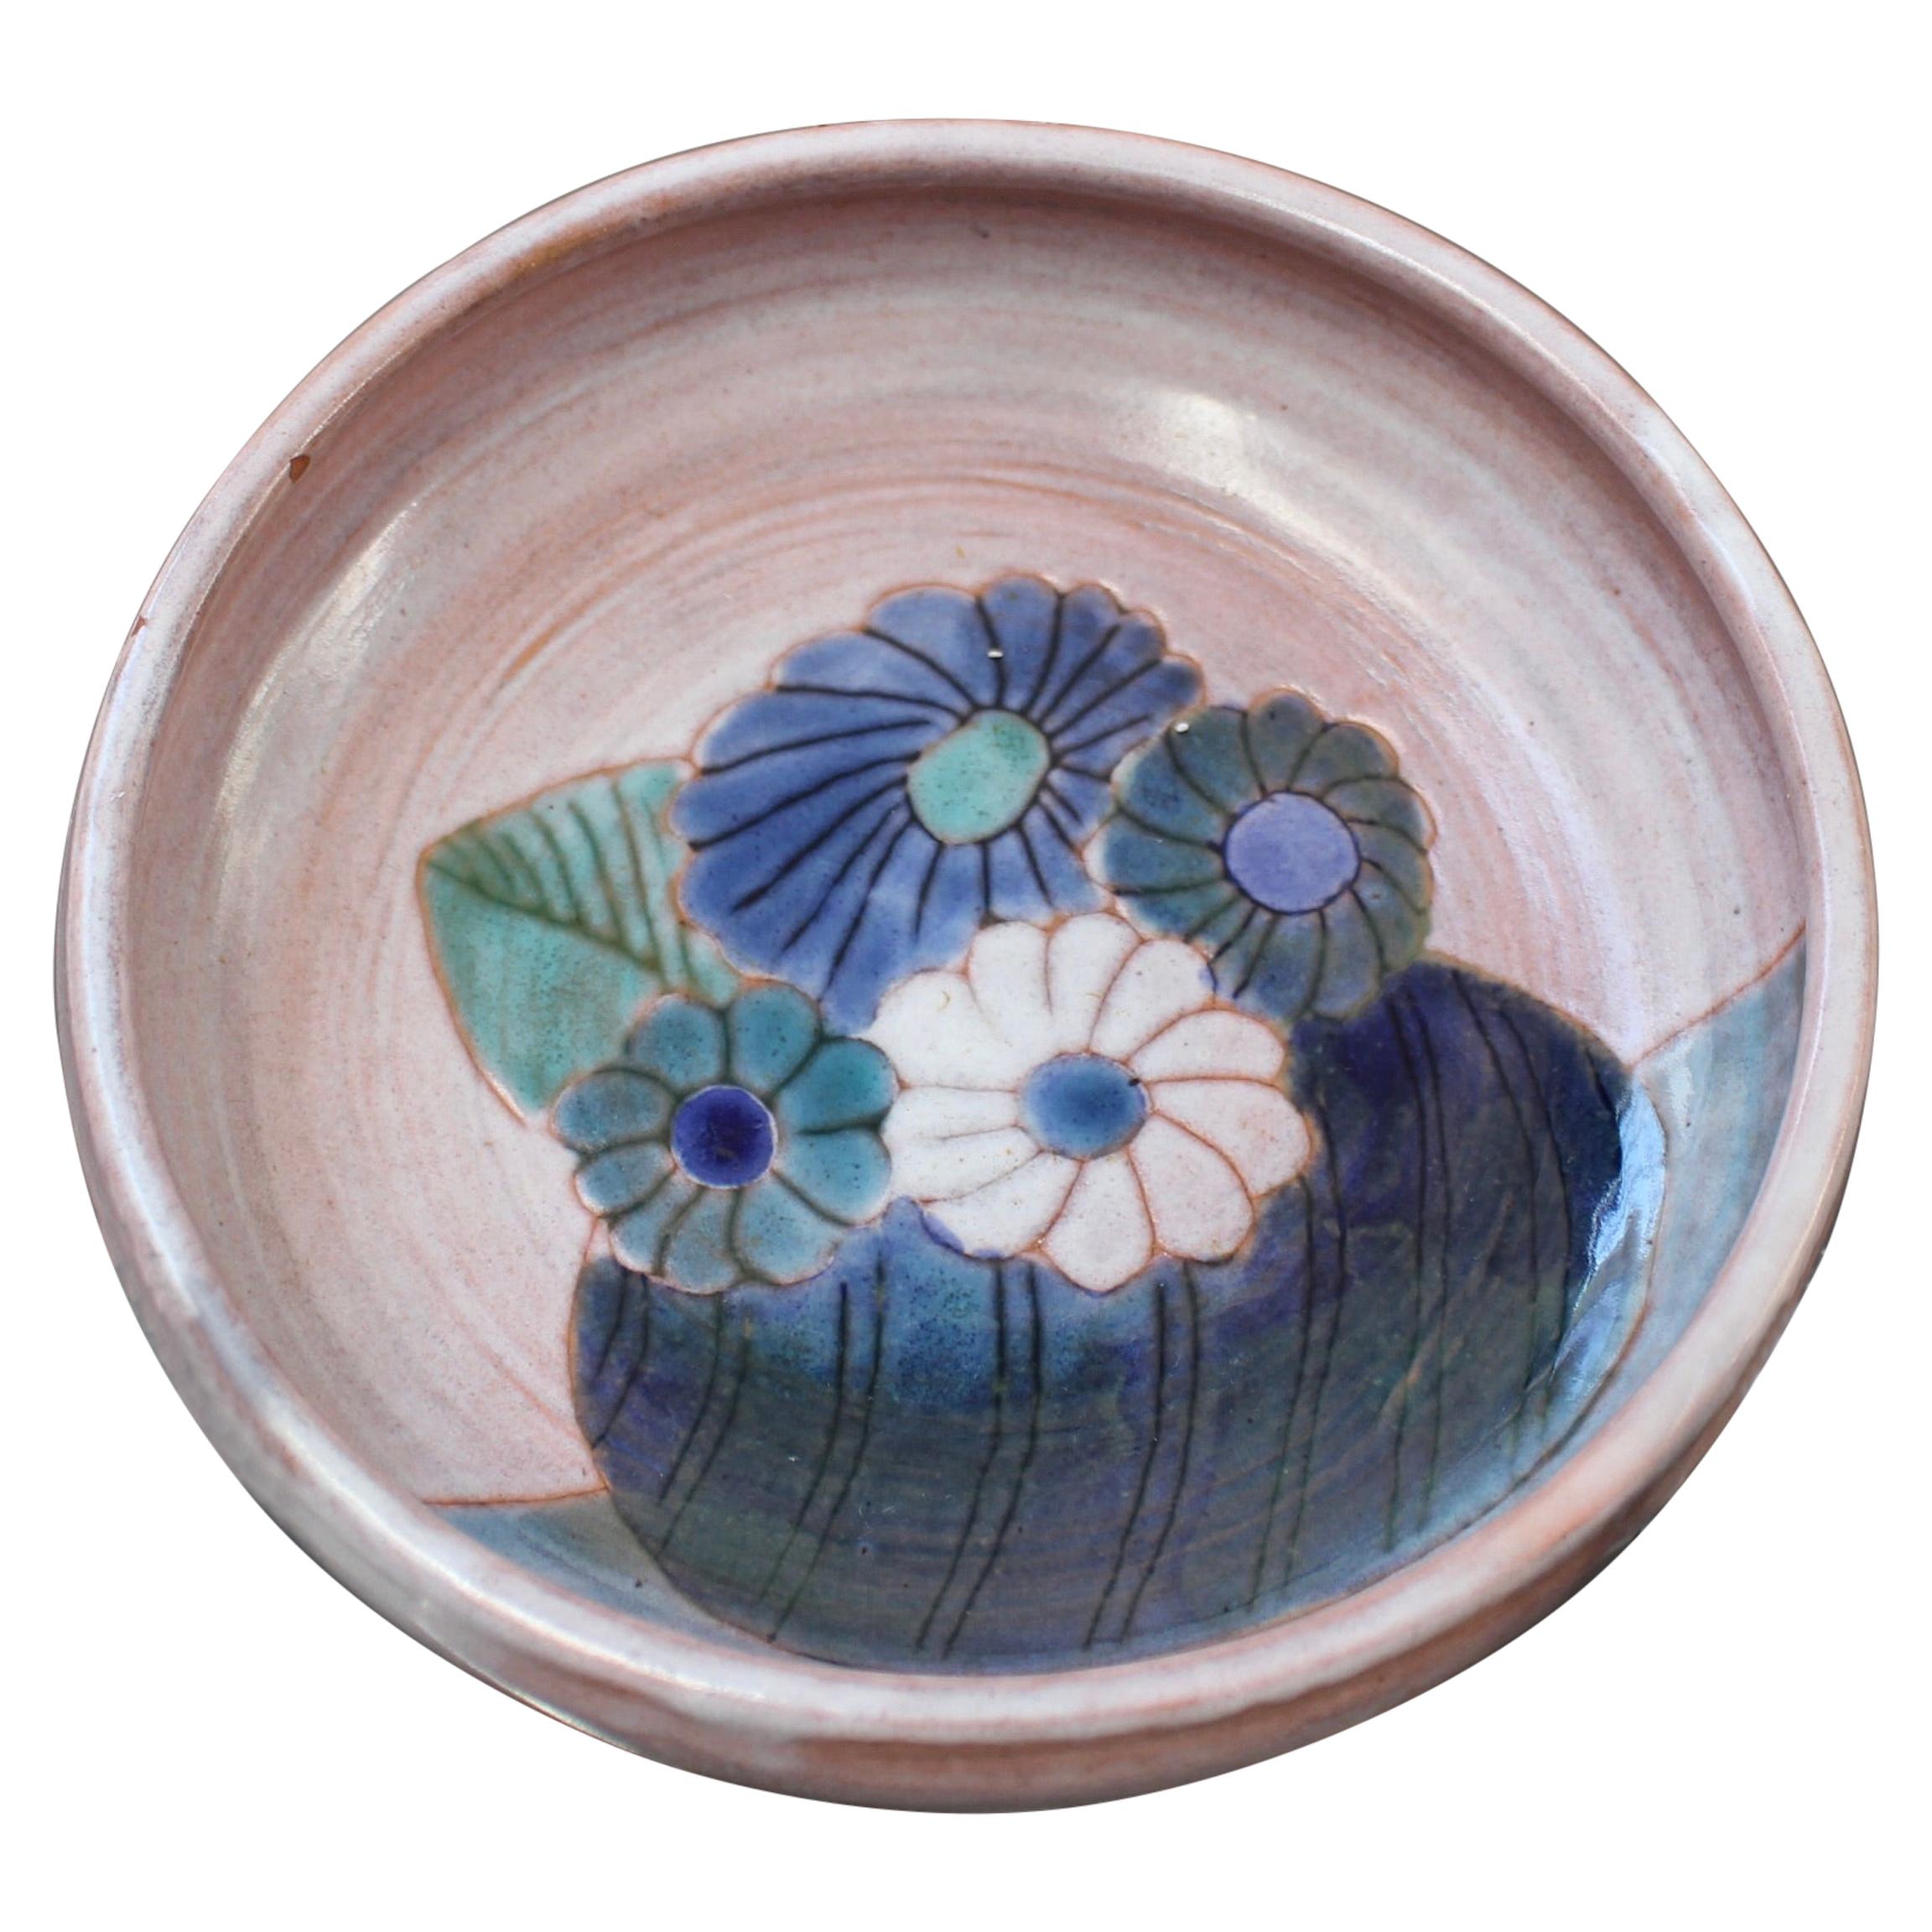 French Decorative Ceramic Bowl with Flowers Motif by the Frères Cloutier, Small